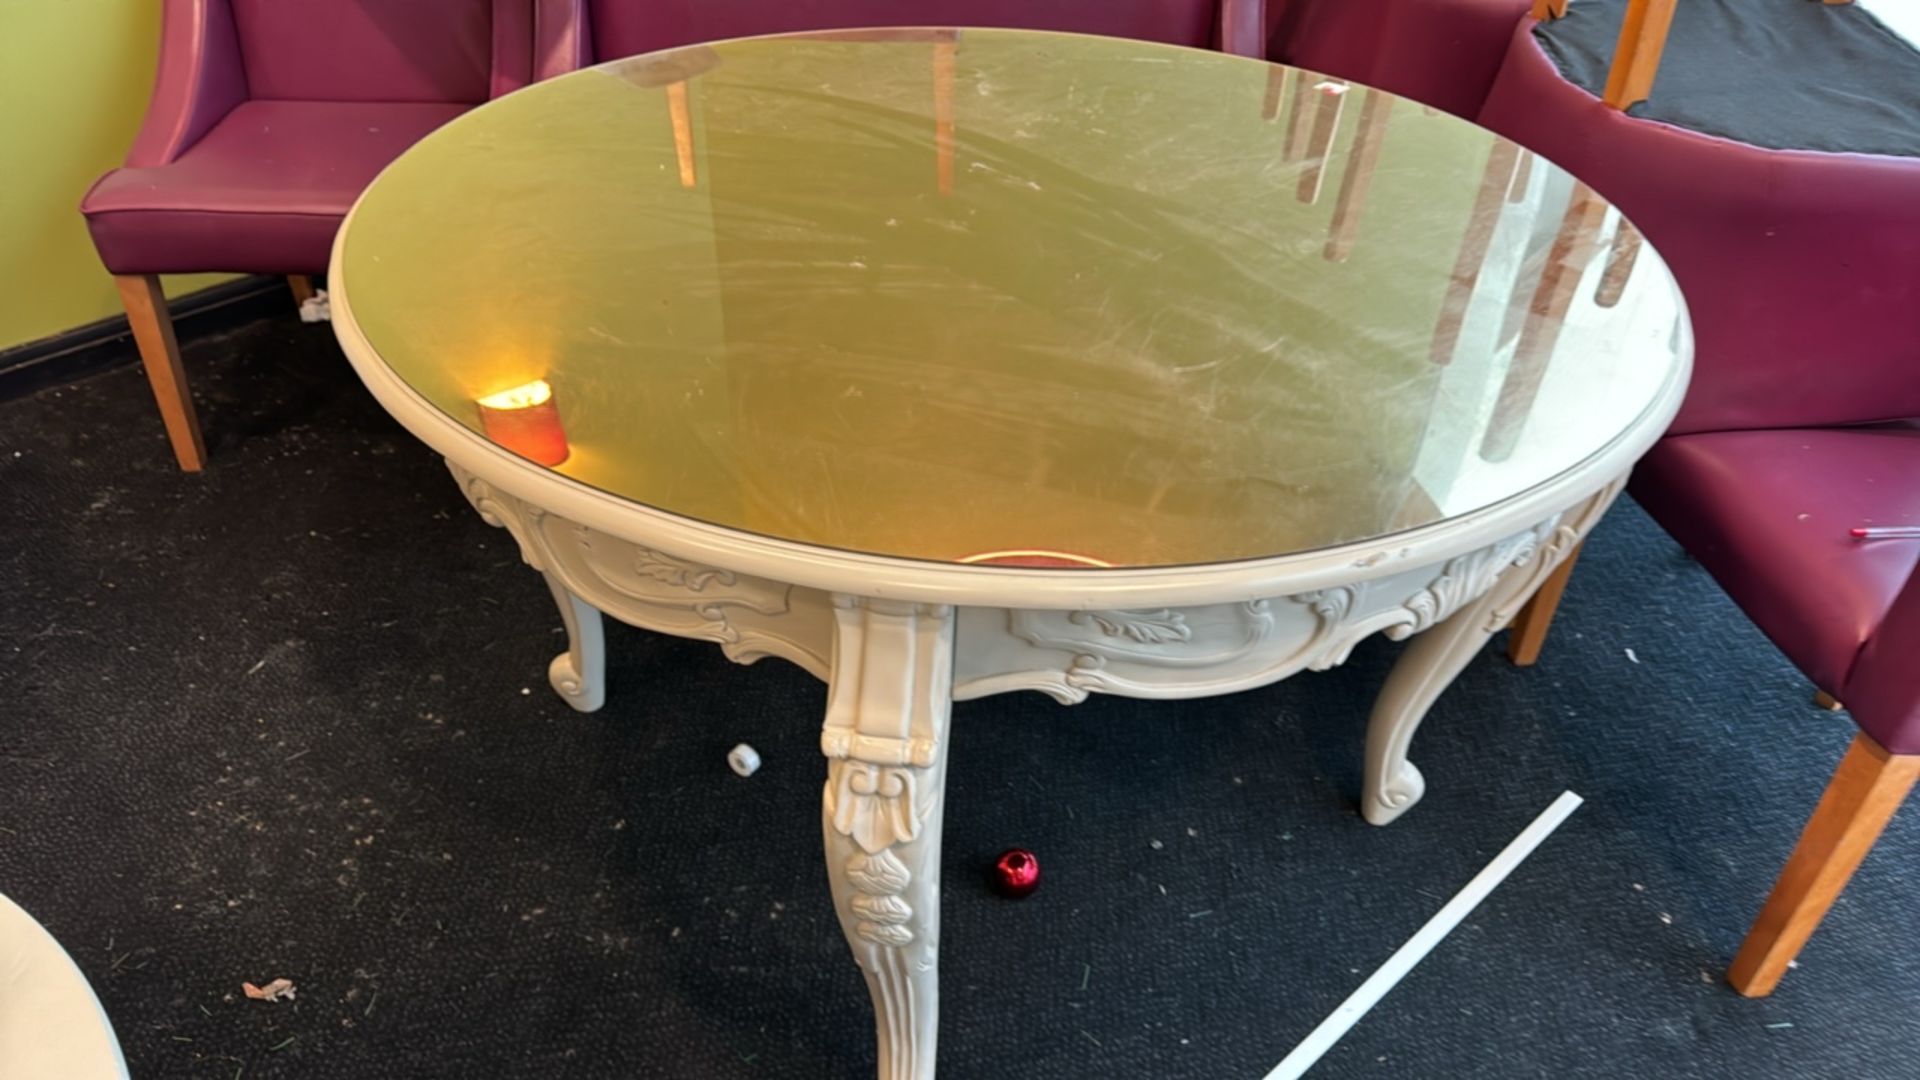 Circular Wood Table with Mirrored Glass Top - Image 2 of 4